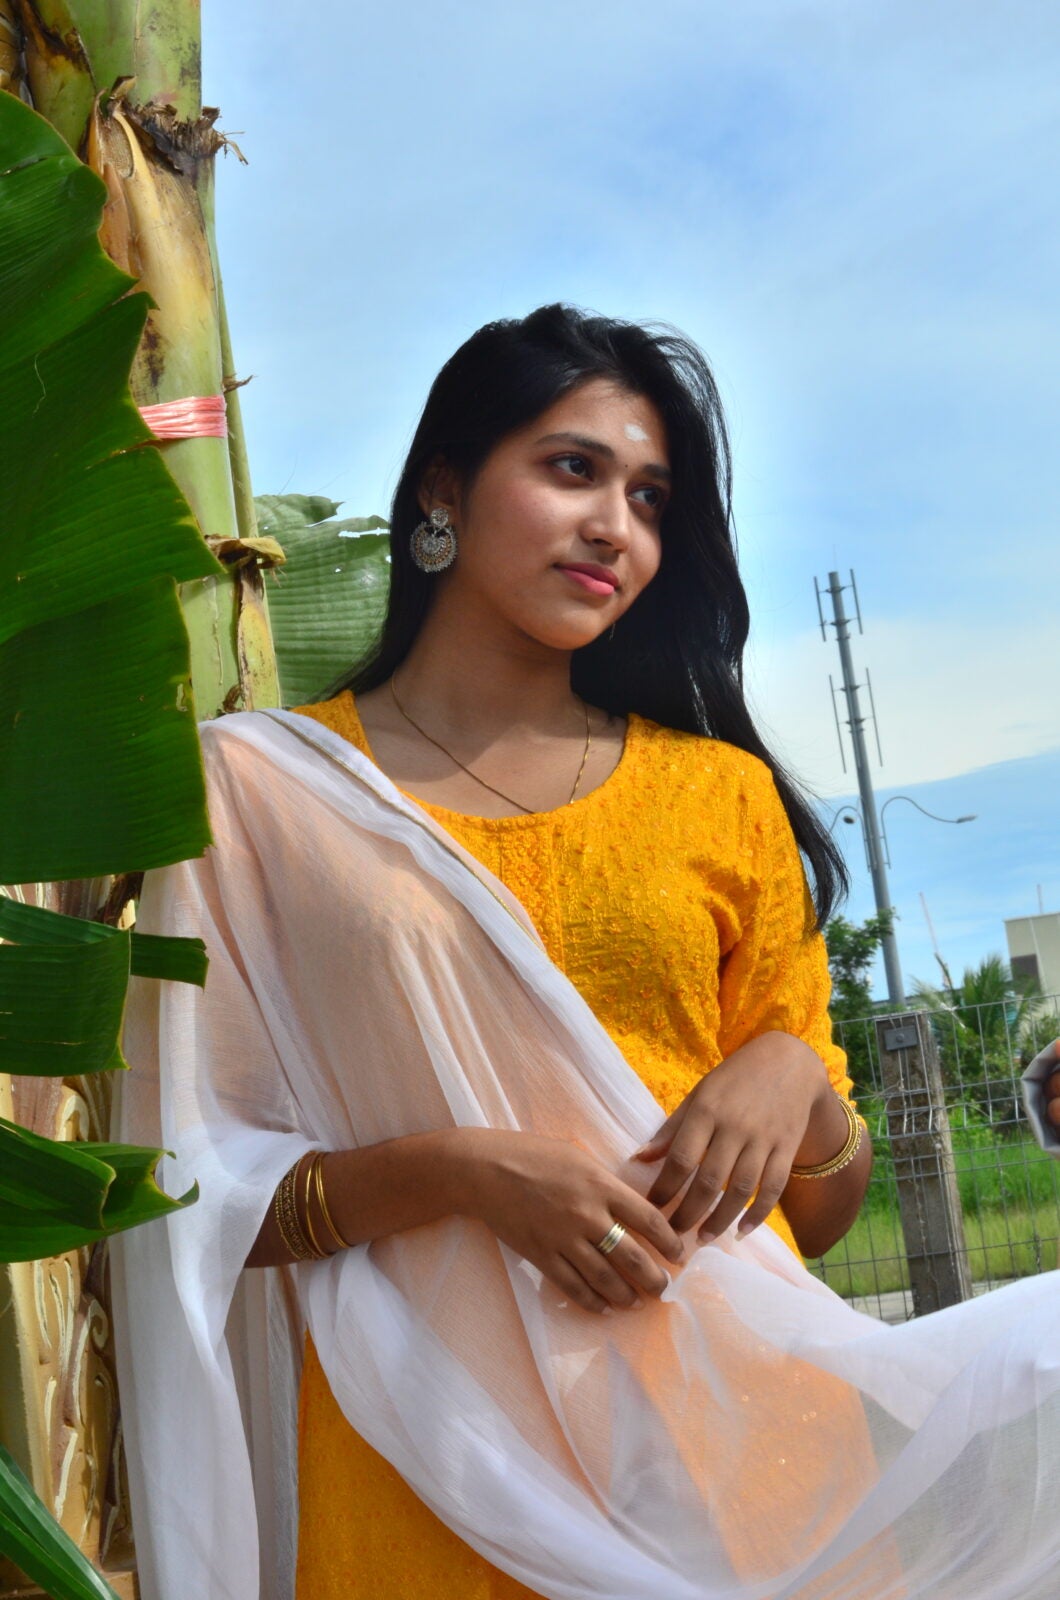 A beautiful young Indian woman posing in her Deepavali outfit.